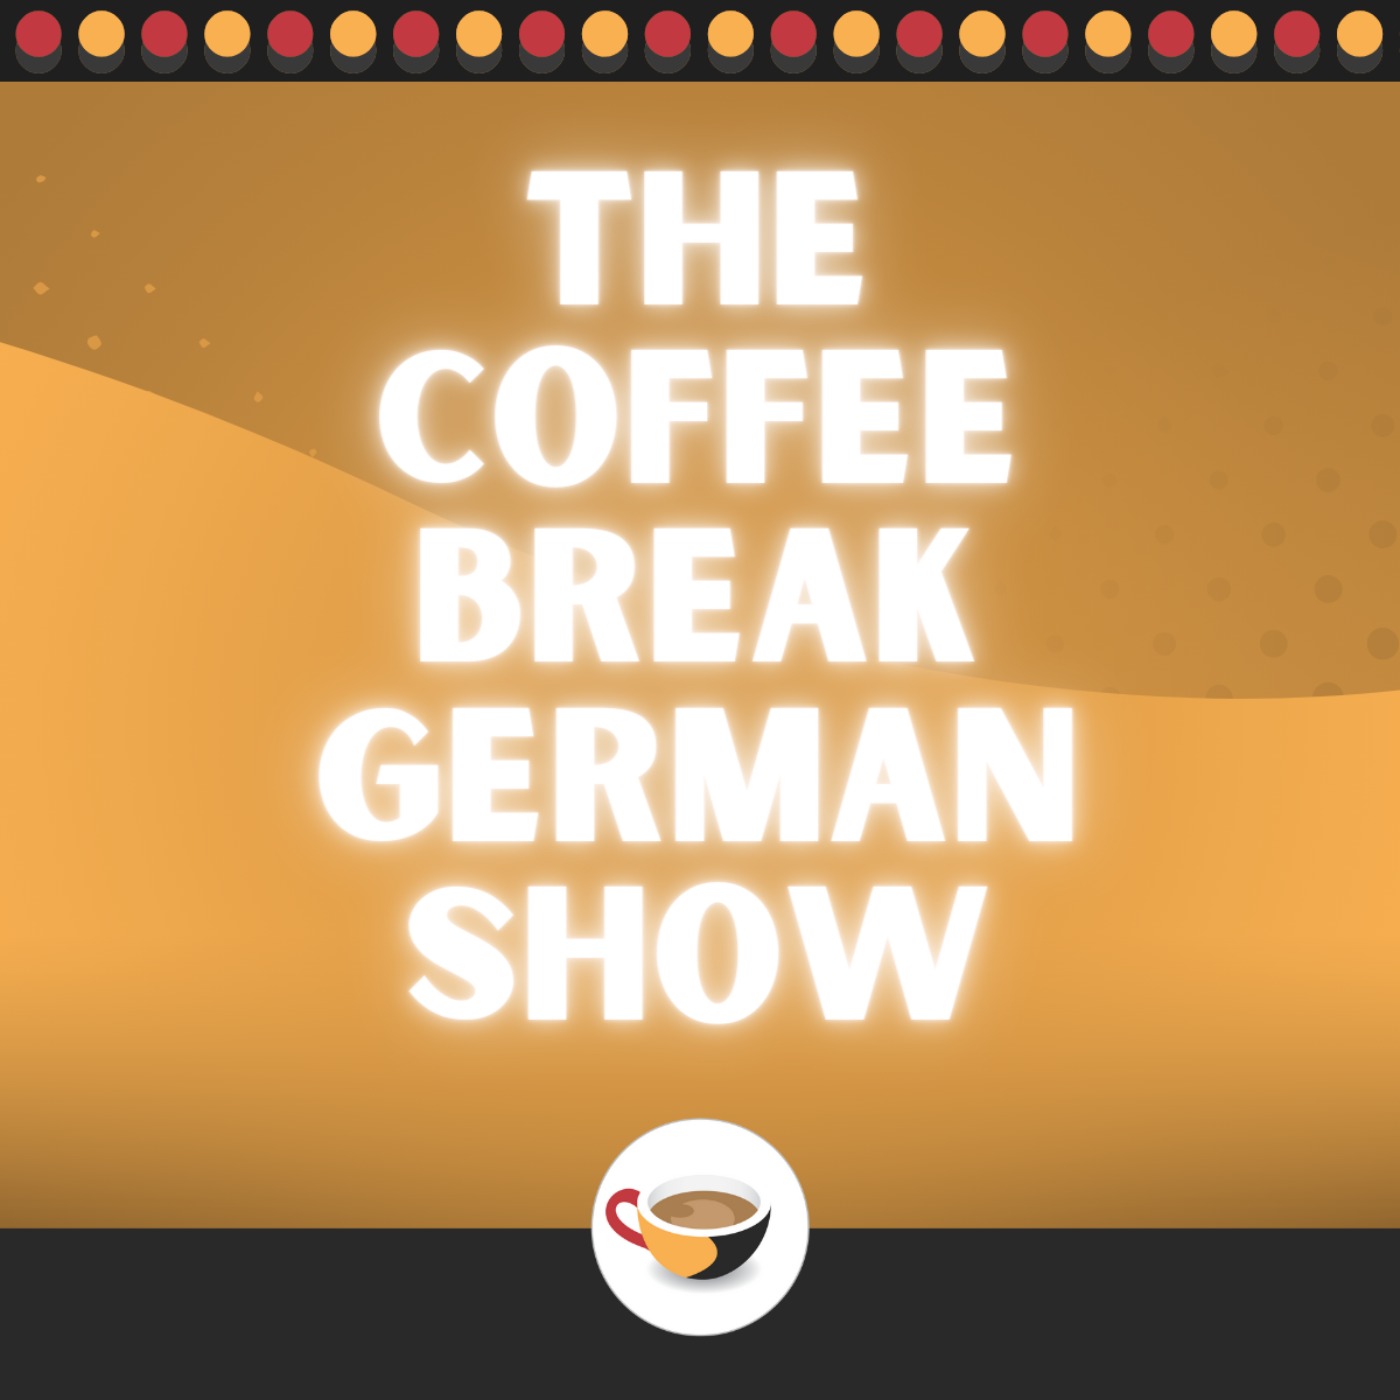 Using the formal ‘you’ | The Coffee Break German Show 1.05